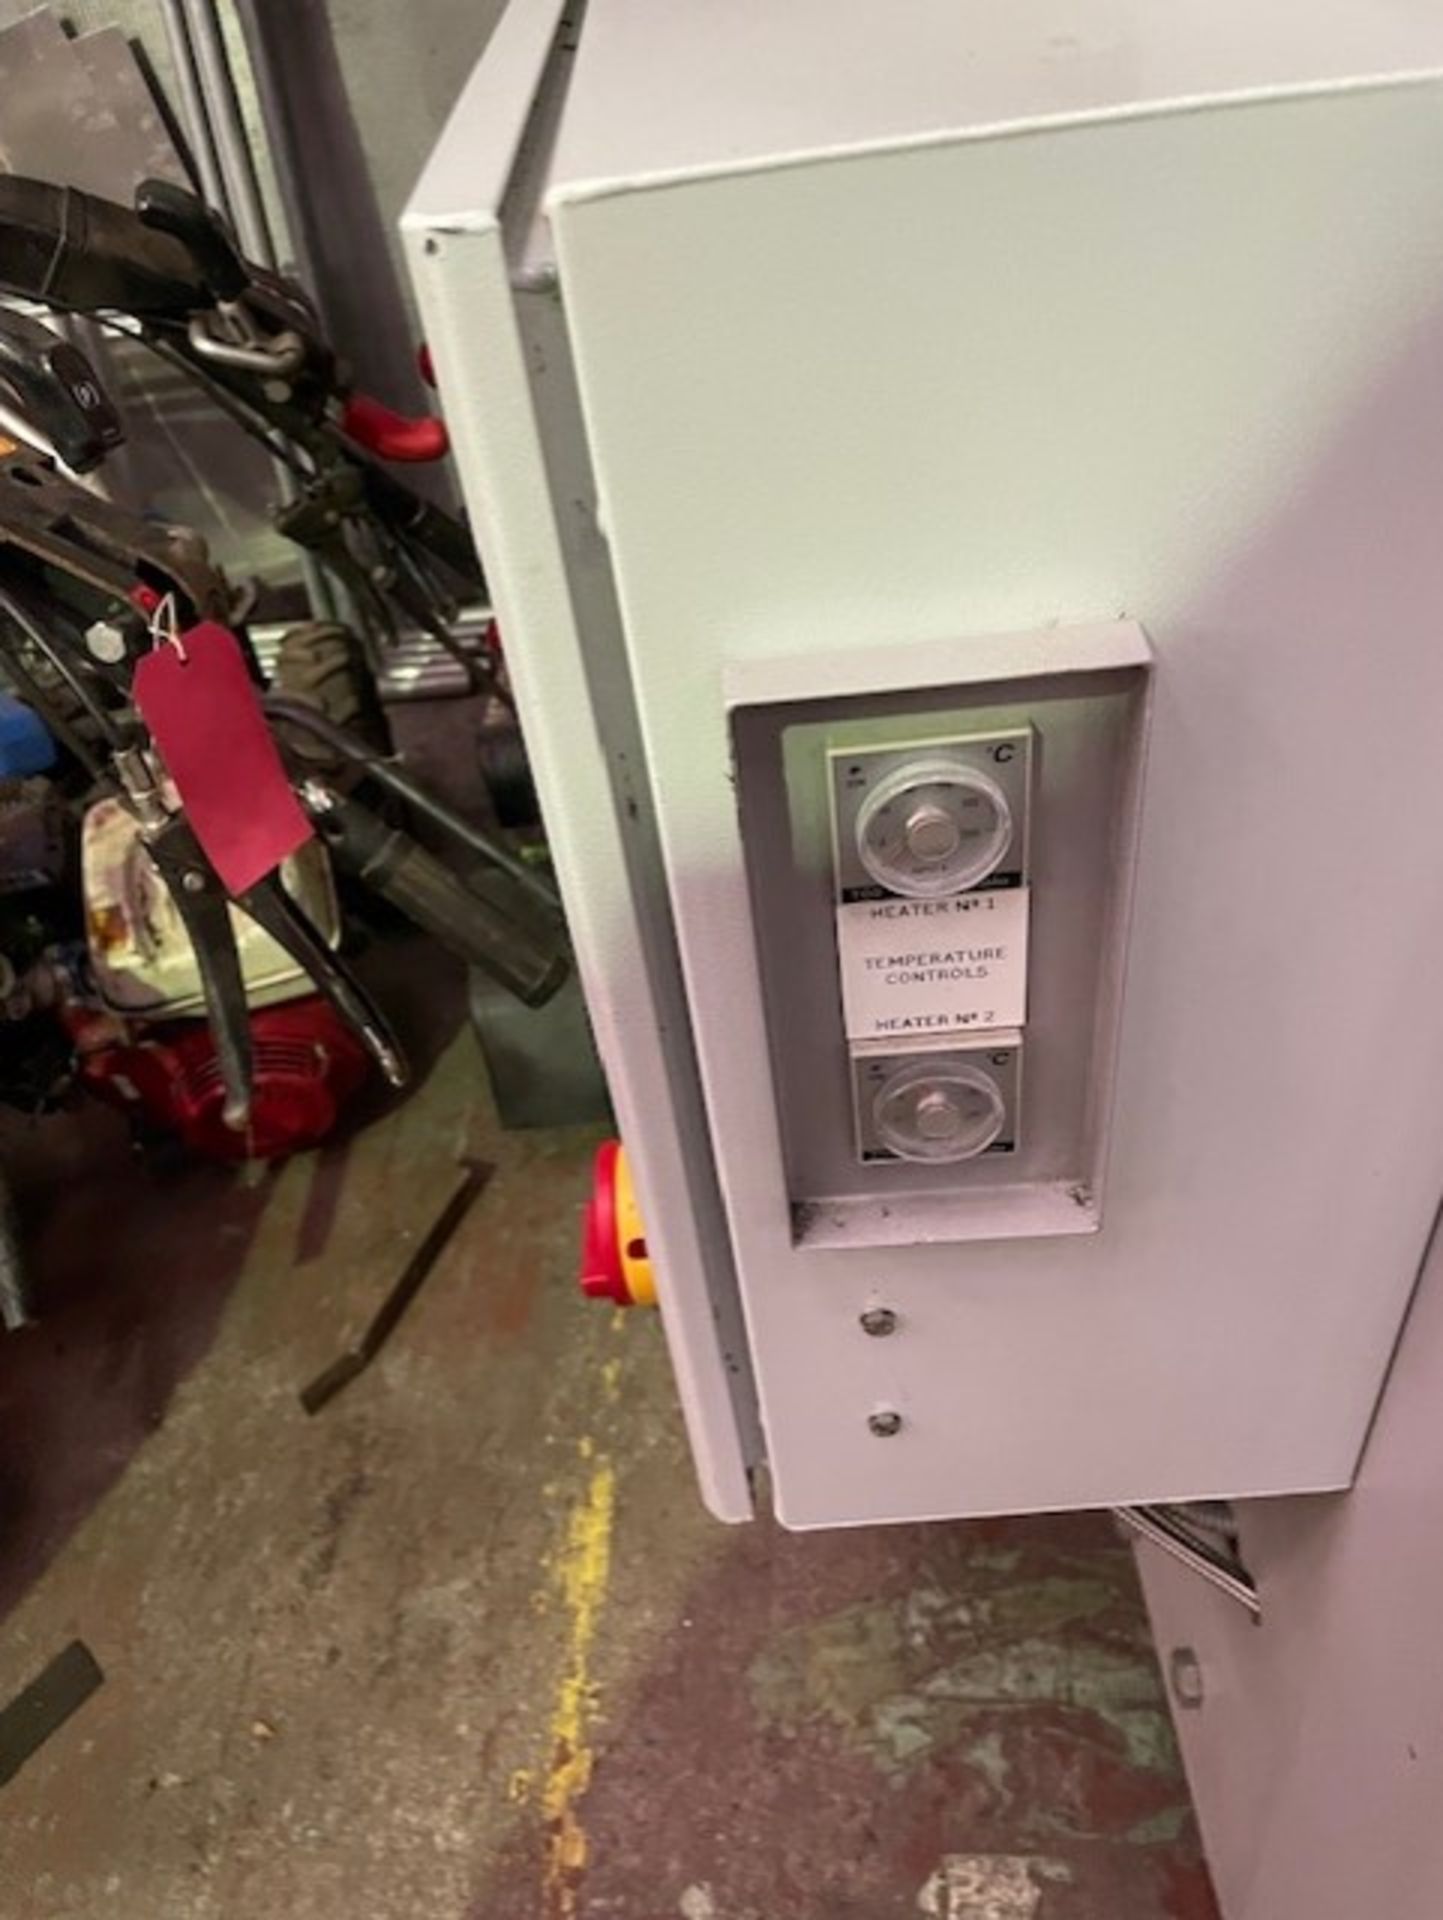 Laundry press it’s a BMM Weston it’s 3 phase electric it’s in good condition and it’s a commercial - Image 3 of 7